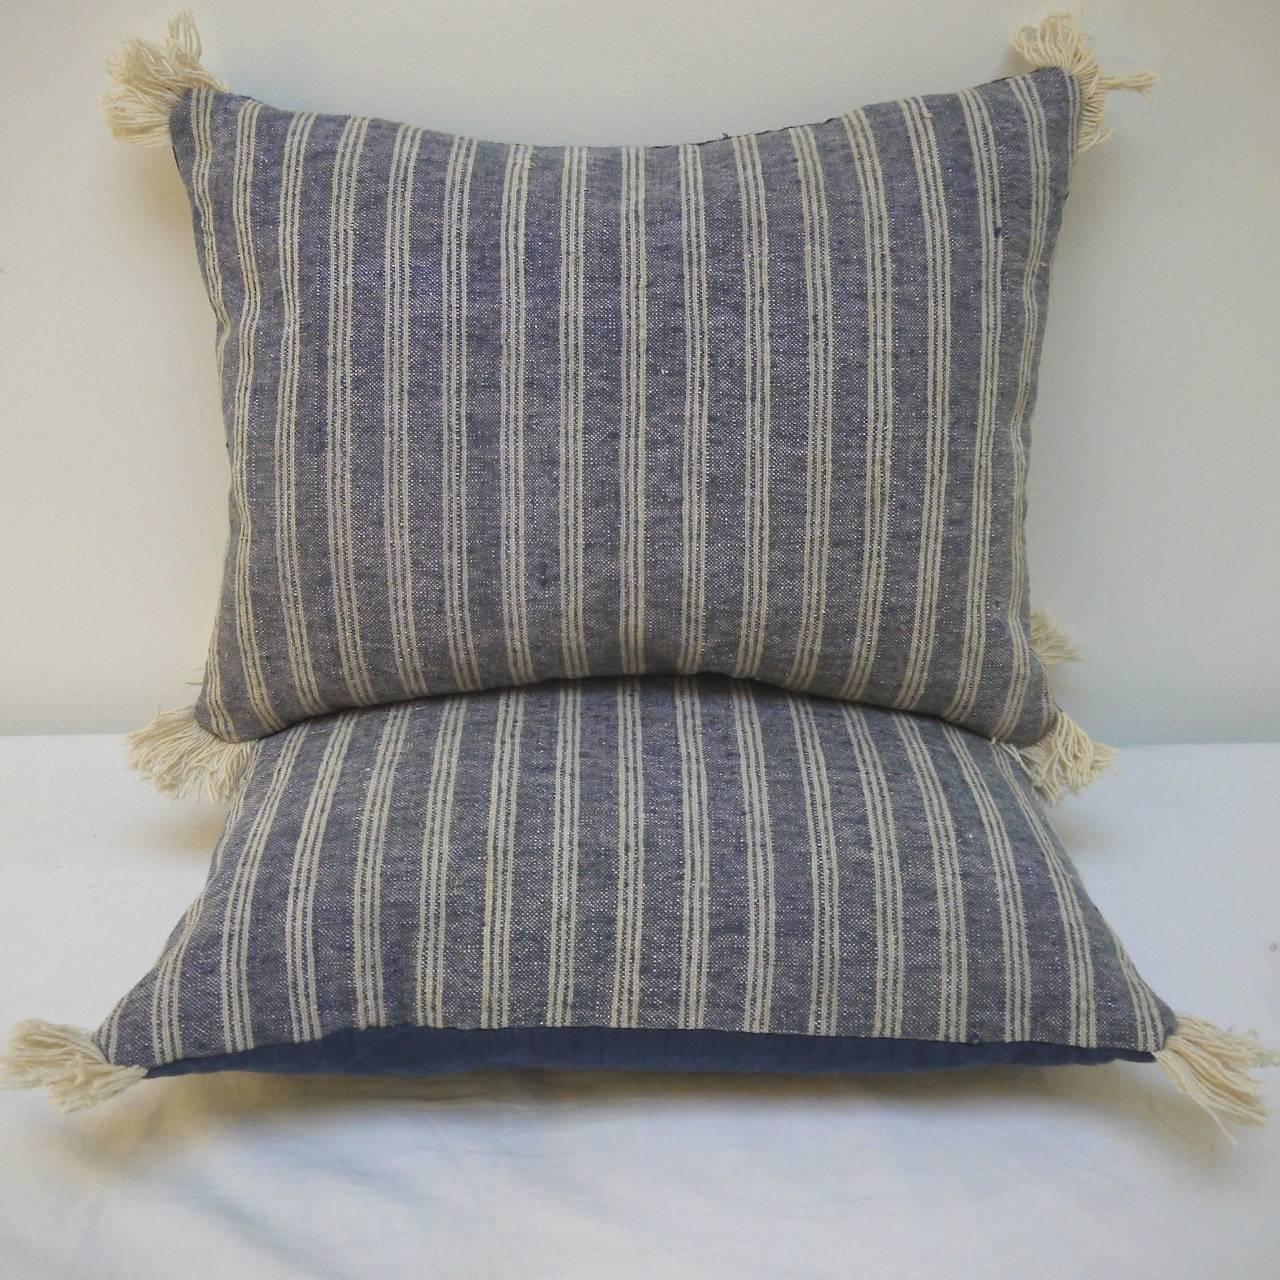 Pair of 19th Century French Antique Woven Striped Pillows 2